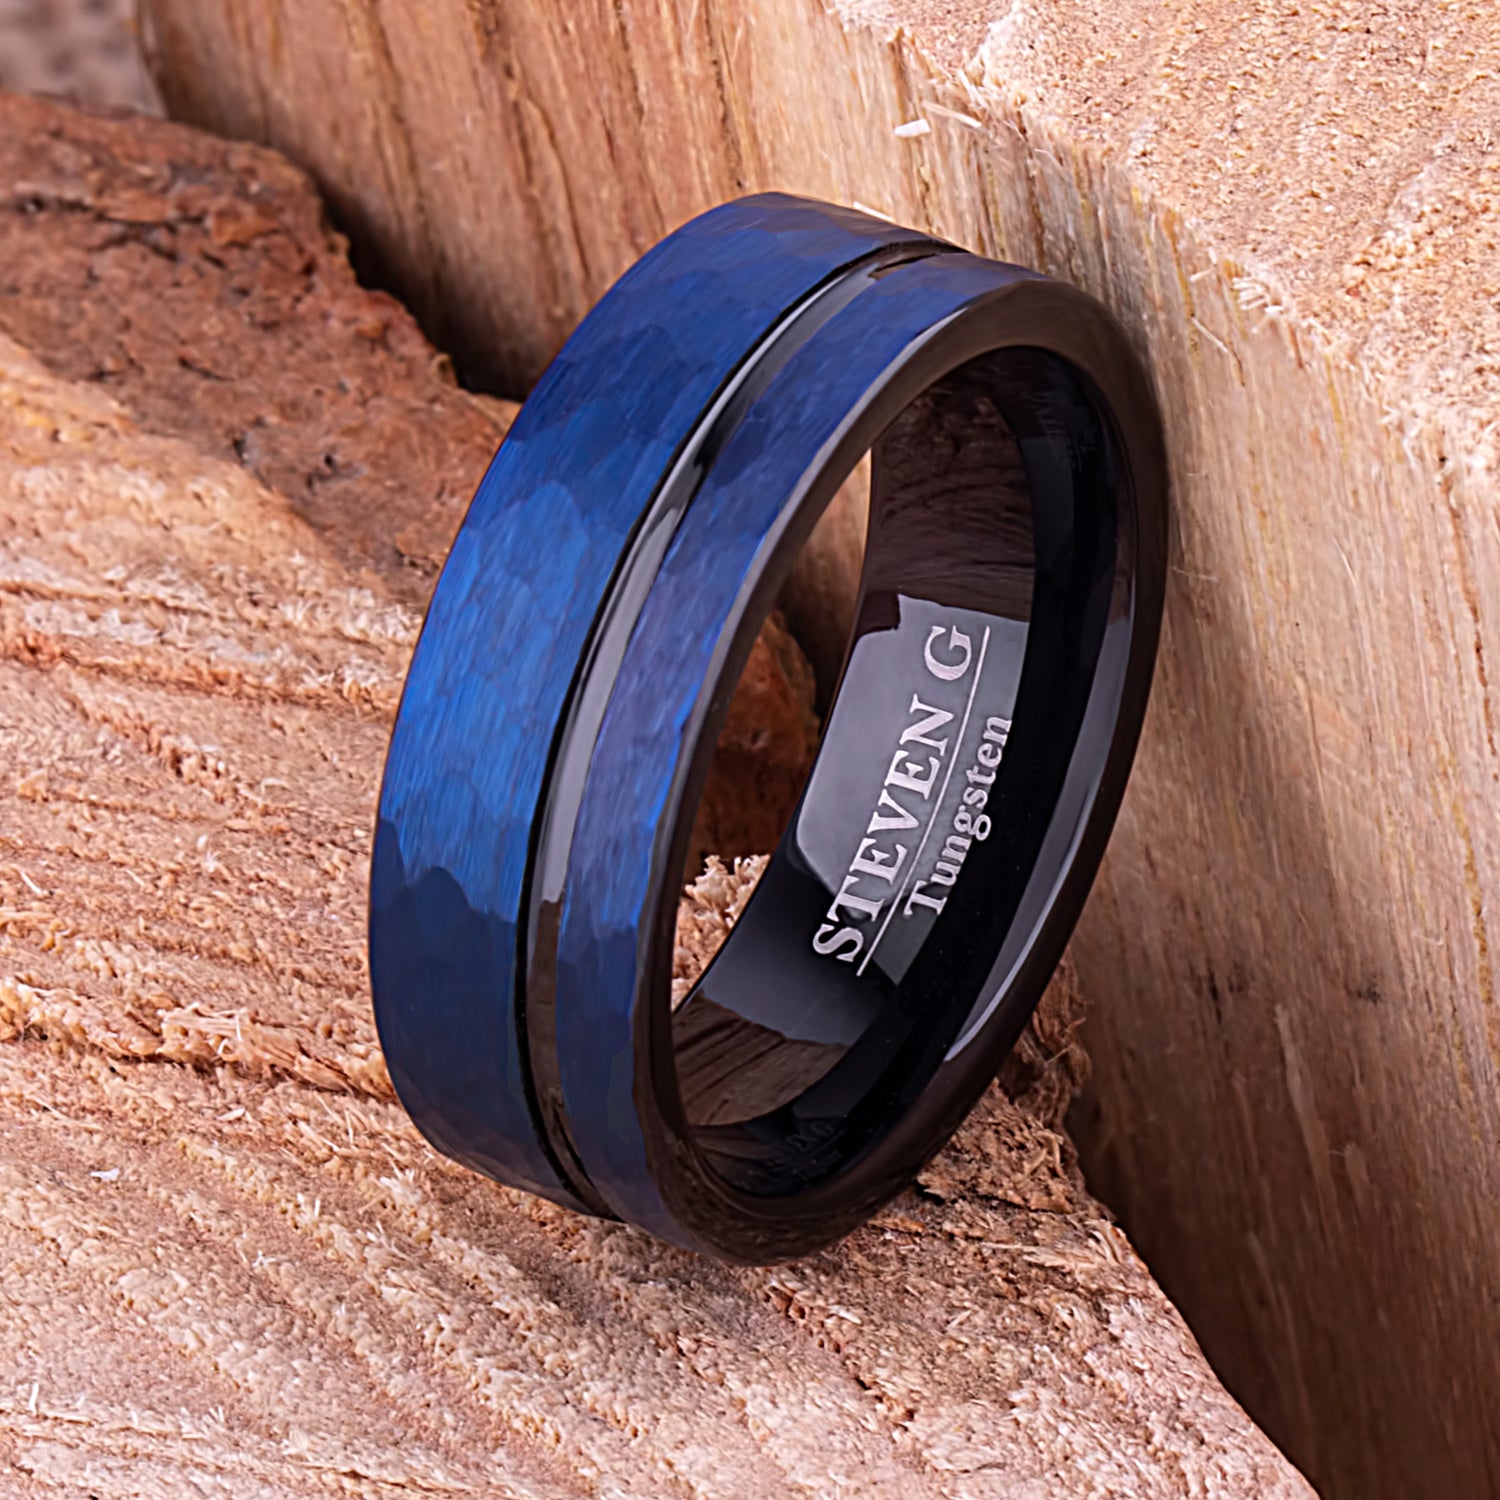 Black and Blue Tungsten Ring 8mm - TCR086 unique black and blue men’s engagement or wedding ring or anniversary band